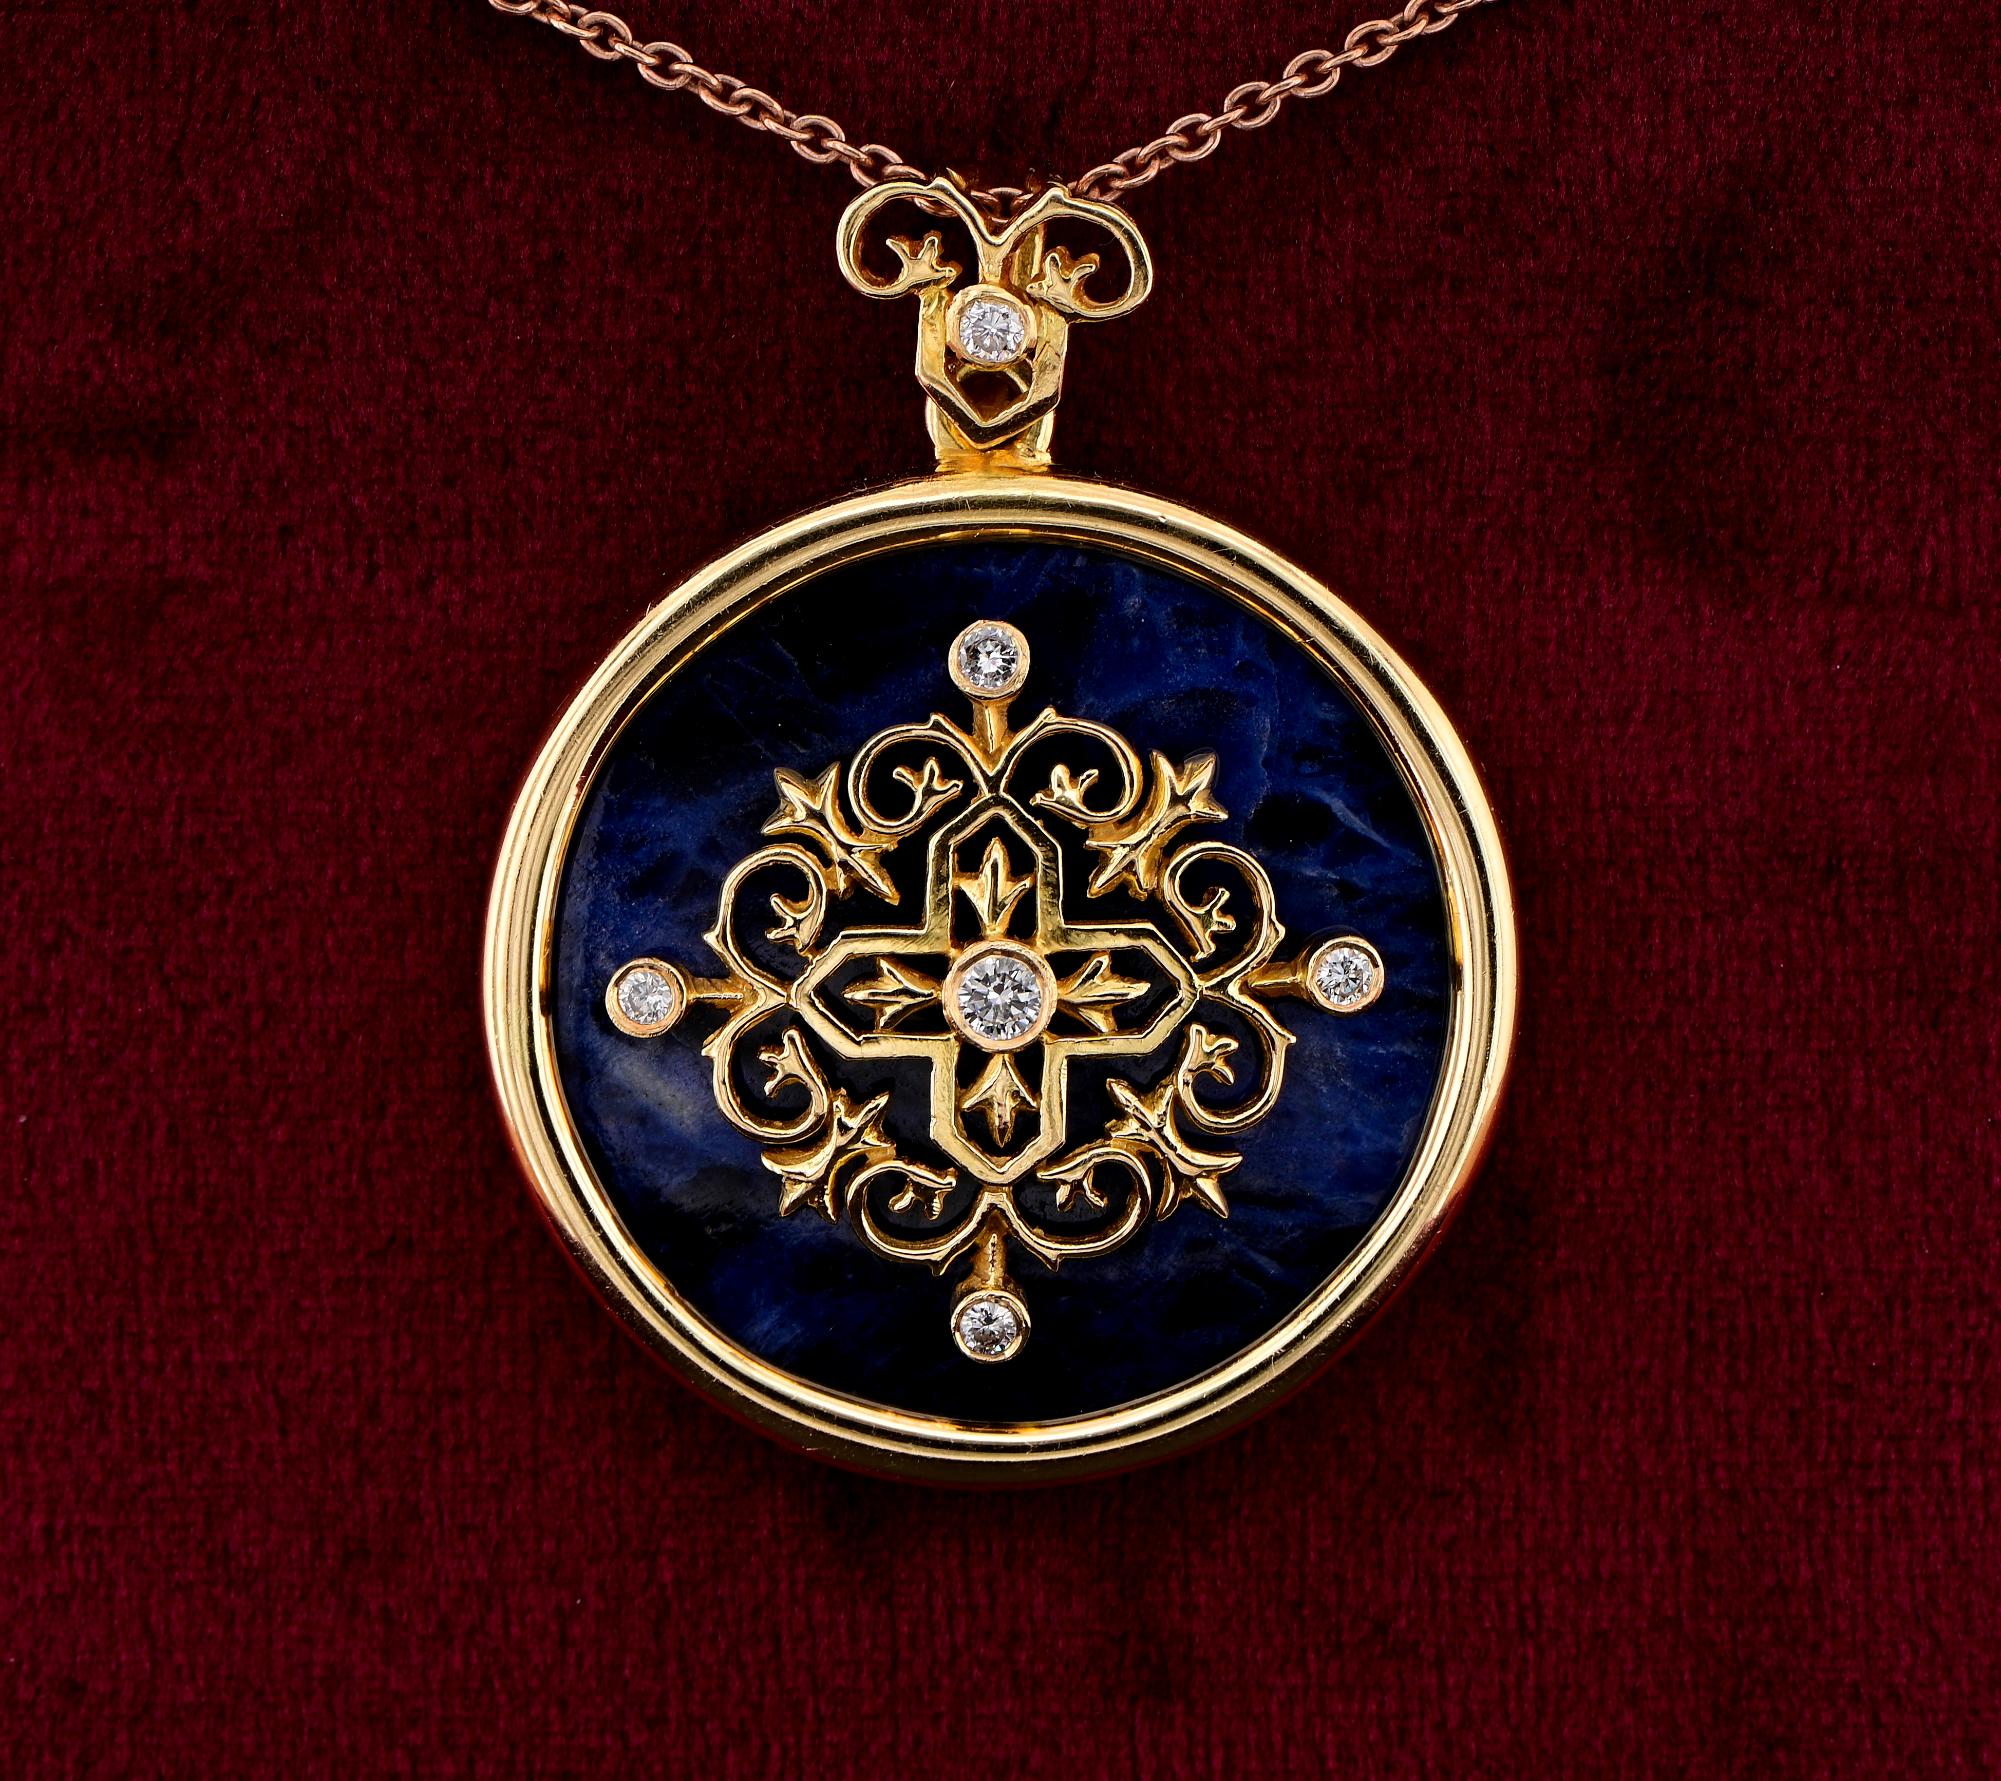 From the Mith
Ilias Lalaounis outstanding 1970 ca large pendant from the Byzantine collection
Elegant dynamic design evoking the ancient jewelry treasures as favorite theme by Lalaouinis, this easy wear, eye catching large pendant is made by a large